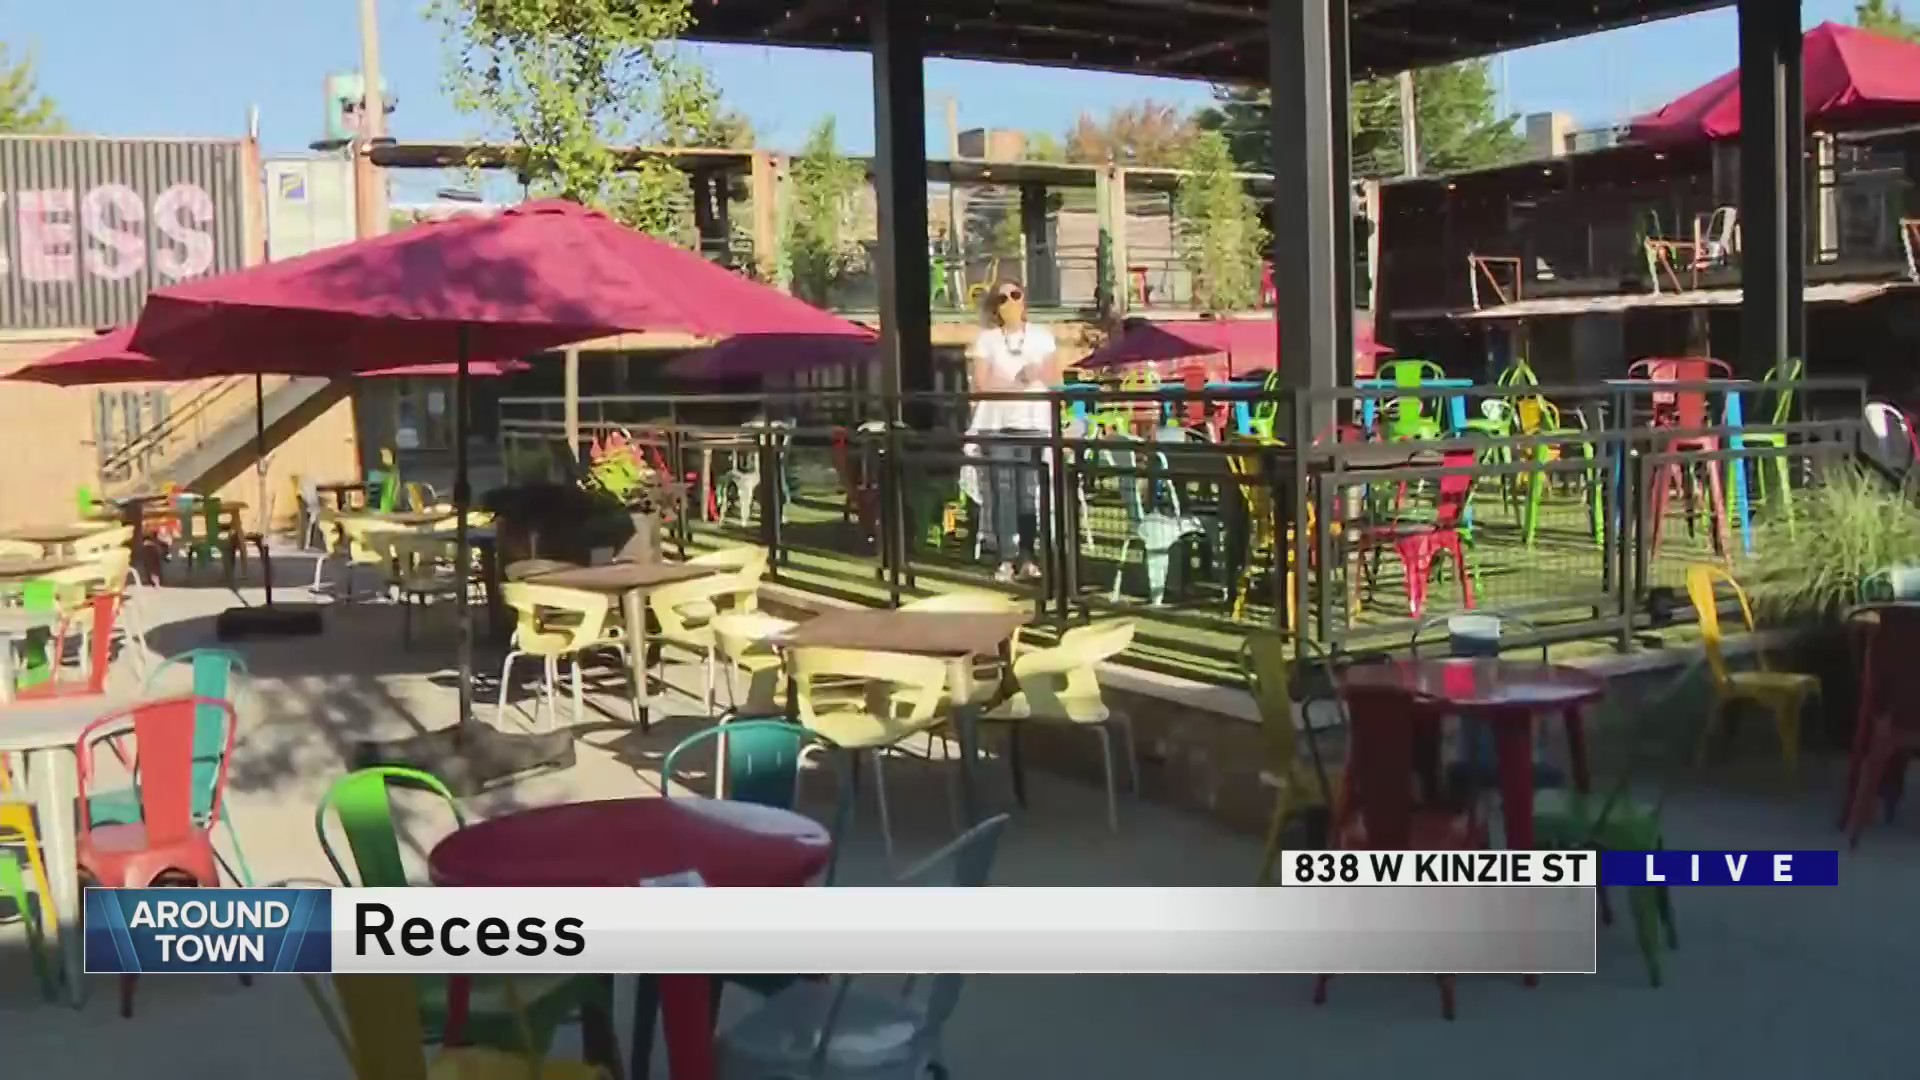 Around Town visits Recess, the largest outdoor dining patio in the city